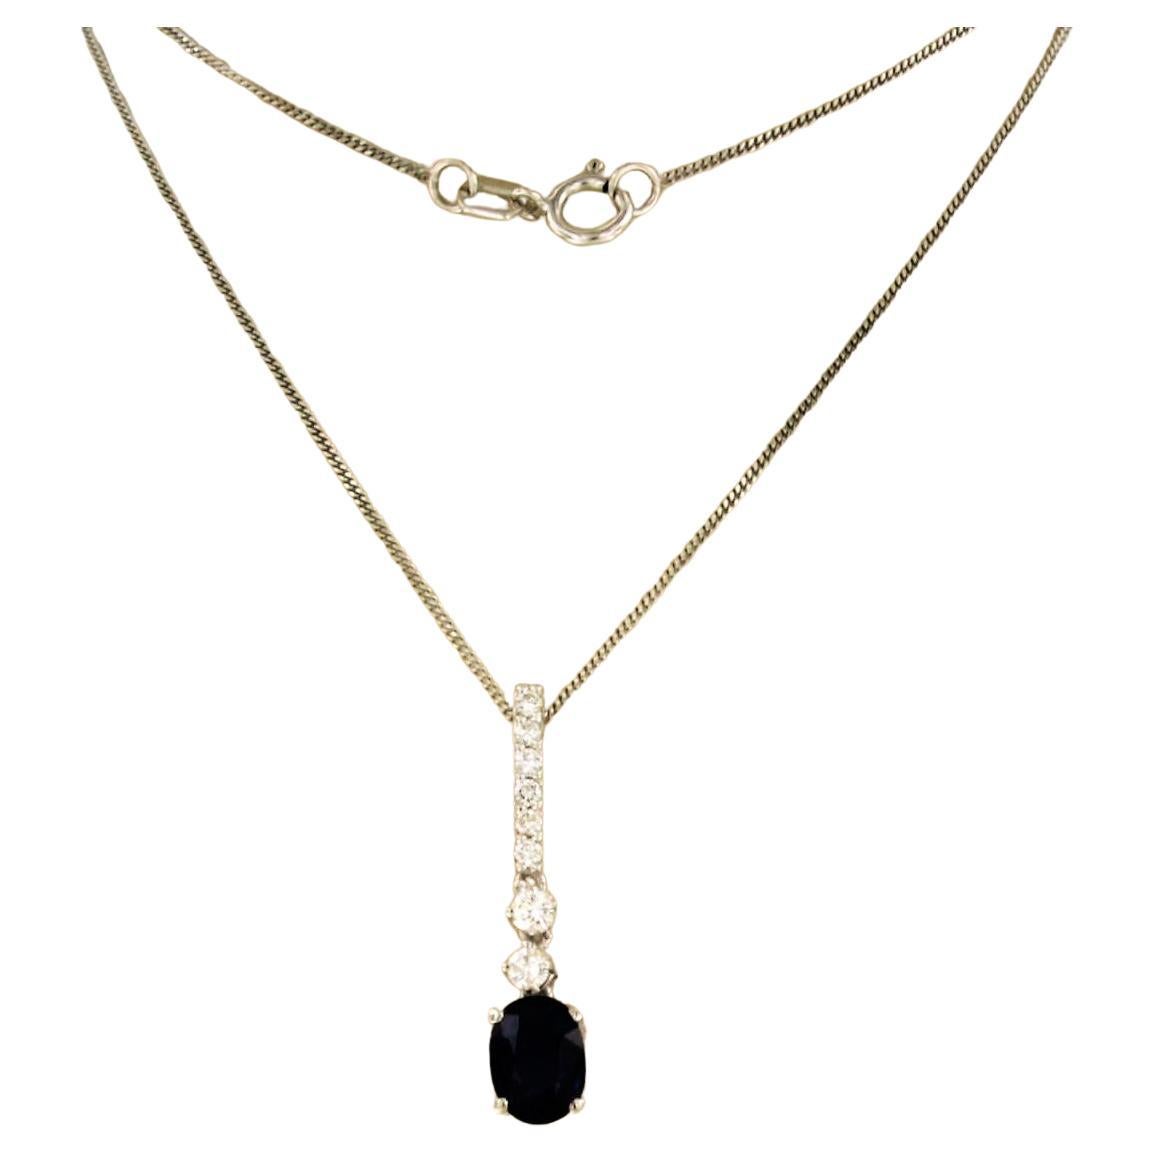 14k white gold necklace with pendant set with sapphire to. 0.75ct and brilliant cut diamond up to. 0.19ct - F/G - VS/SI - 45 cm long

Detailed description

the necklace is 45 cm long and 0.7 mm wide

The size of the pendant is 2.5 cm high and 5.2 mm